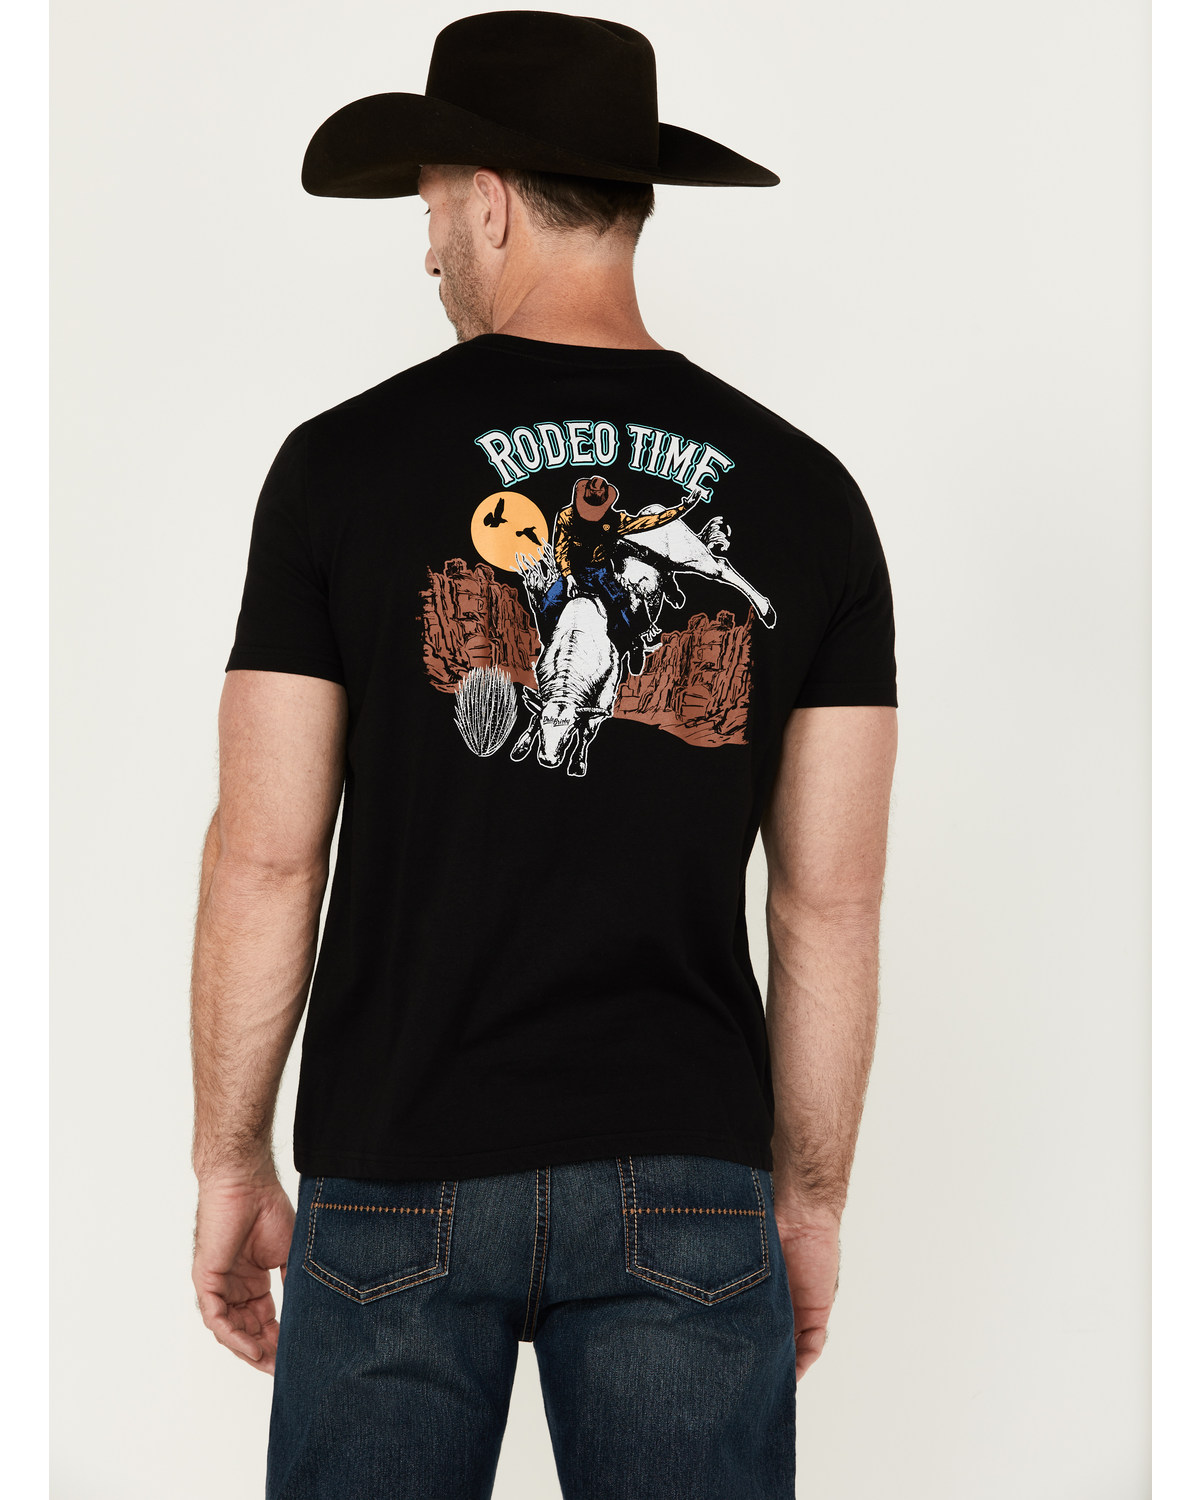 Rock & Roll Denim Men's Boot Barn Exclusive Dale Brisby Rodeo Time Short Sleeve Graphic T-Shirt